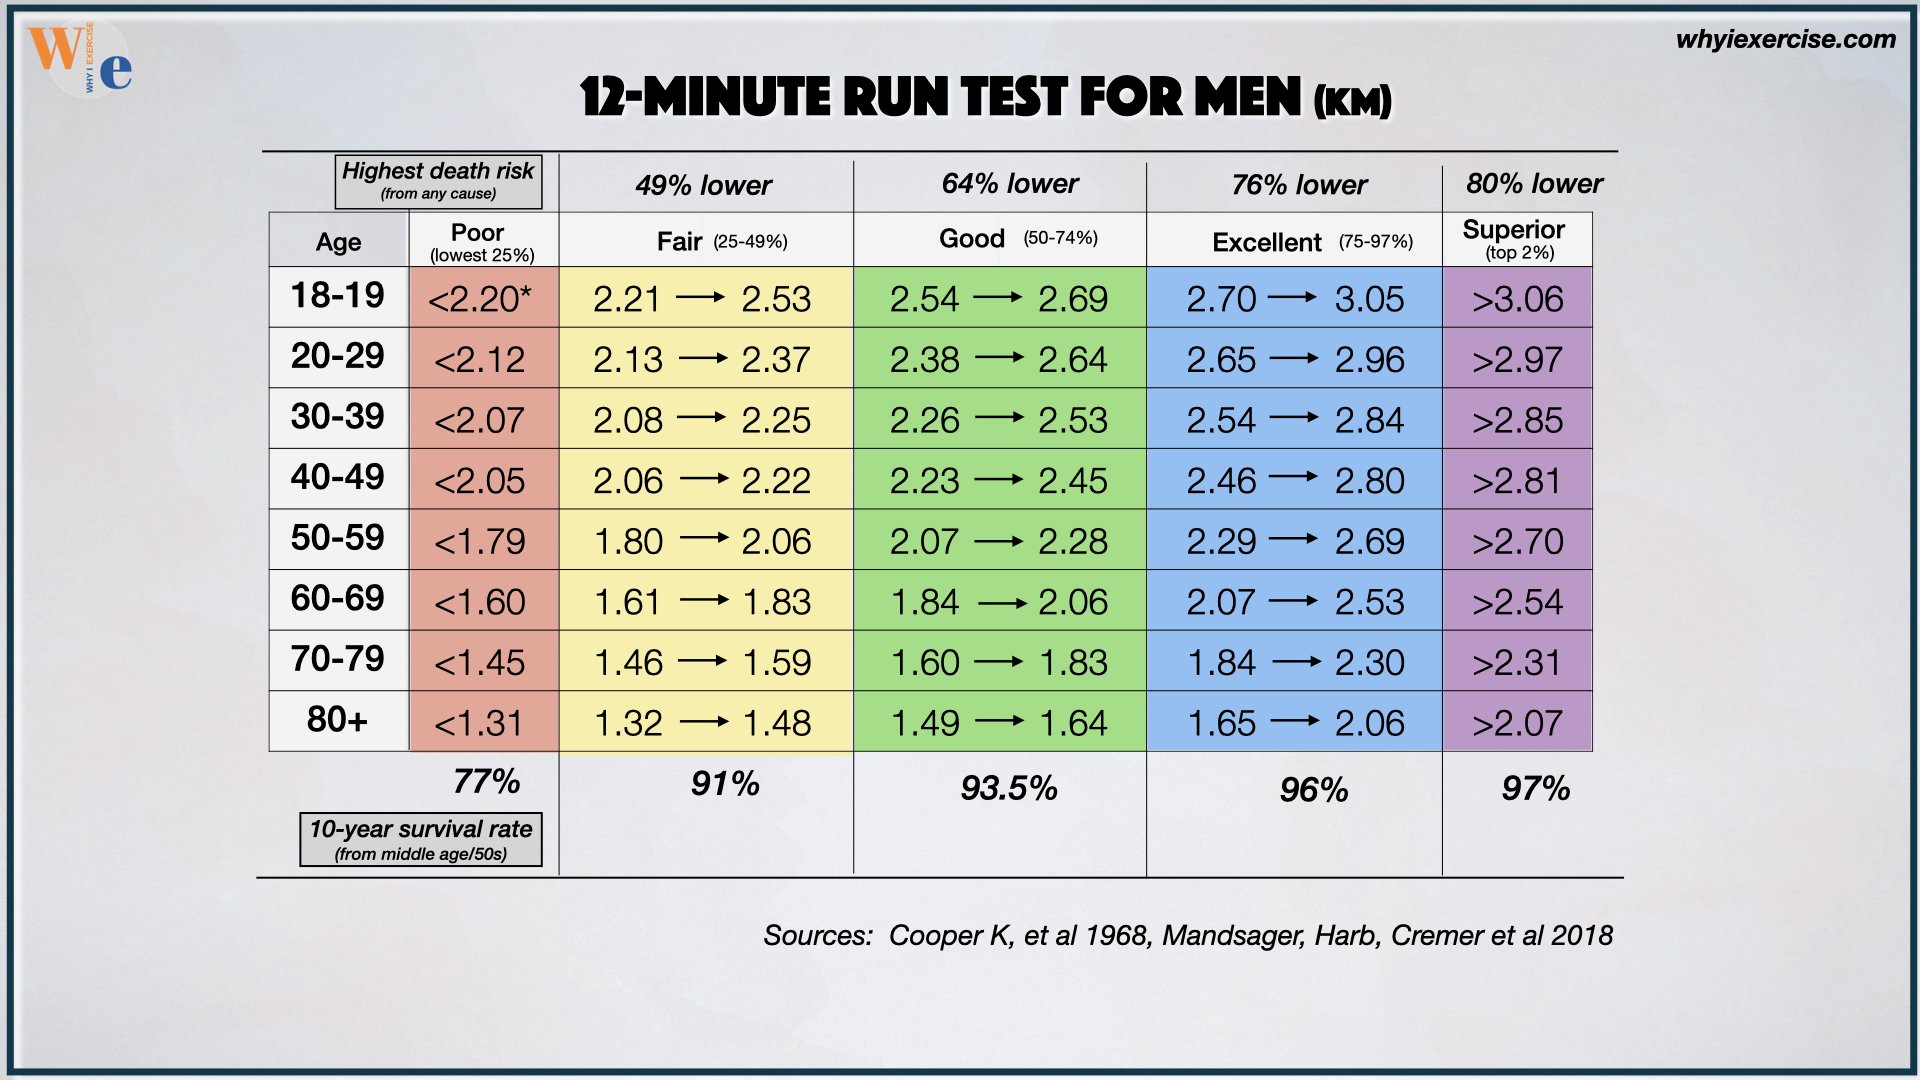 Cooper 12-minute run men's age group chart based on VO2 max data